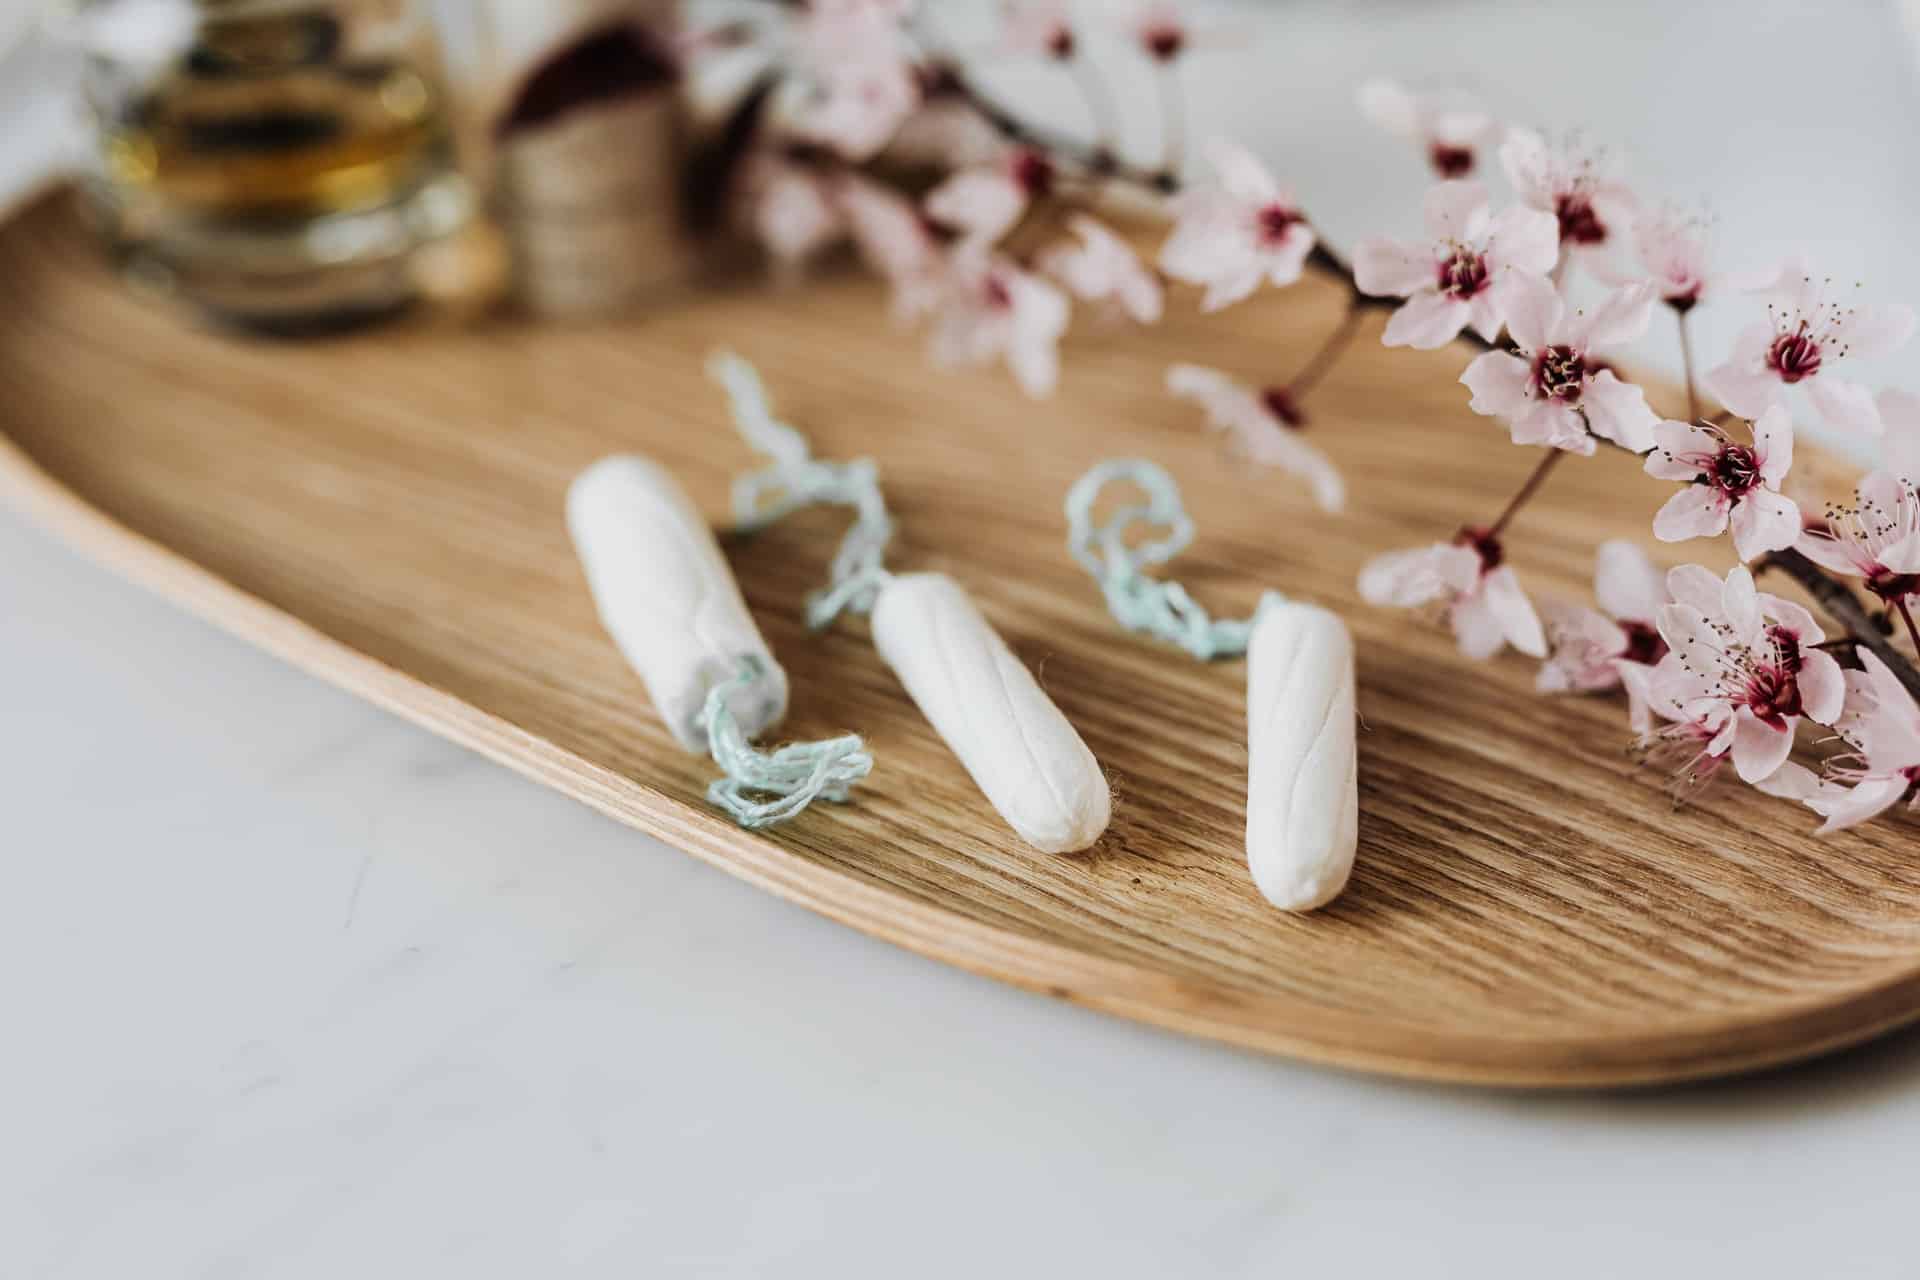 Why are women using organic tampons during their menstruation?